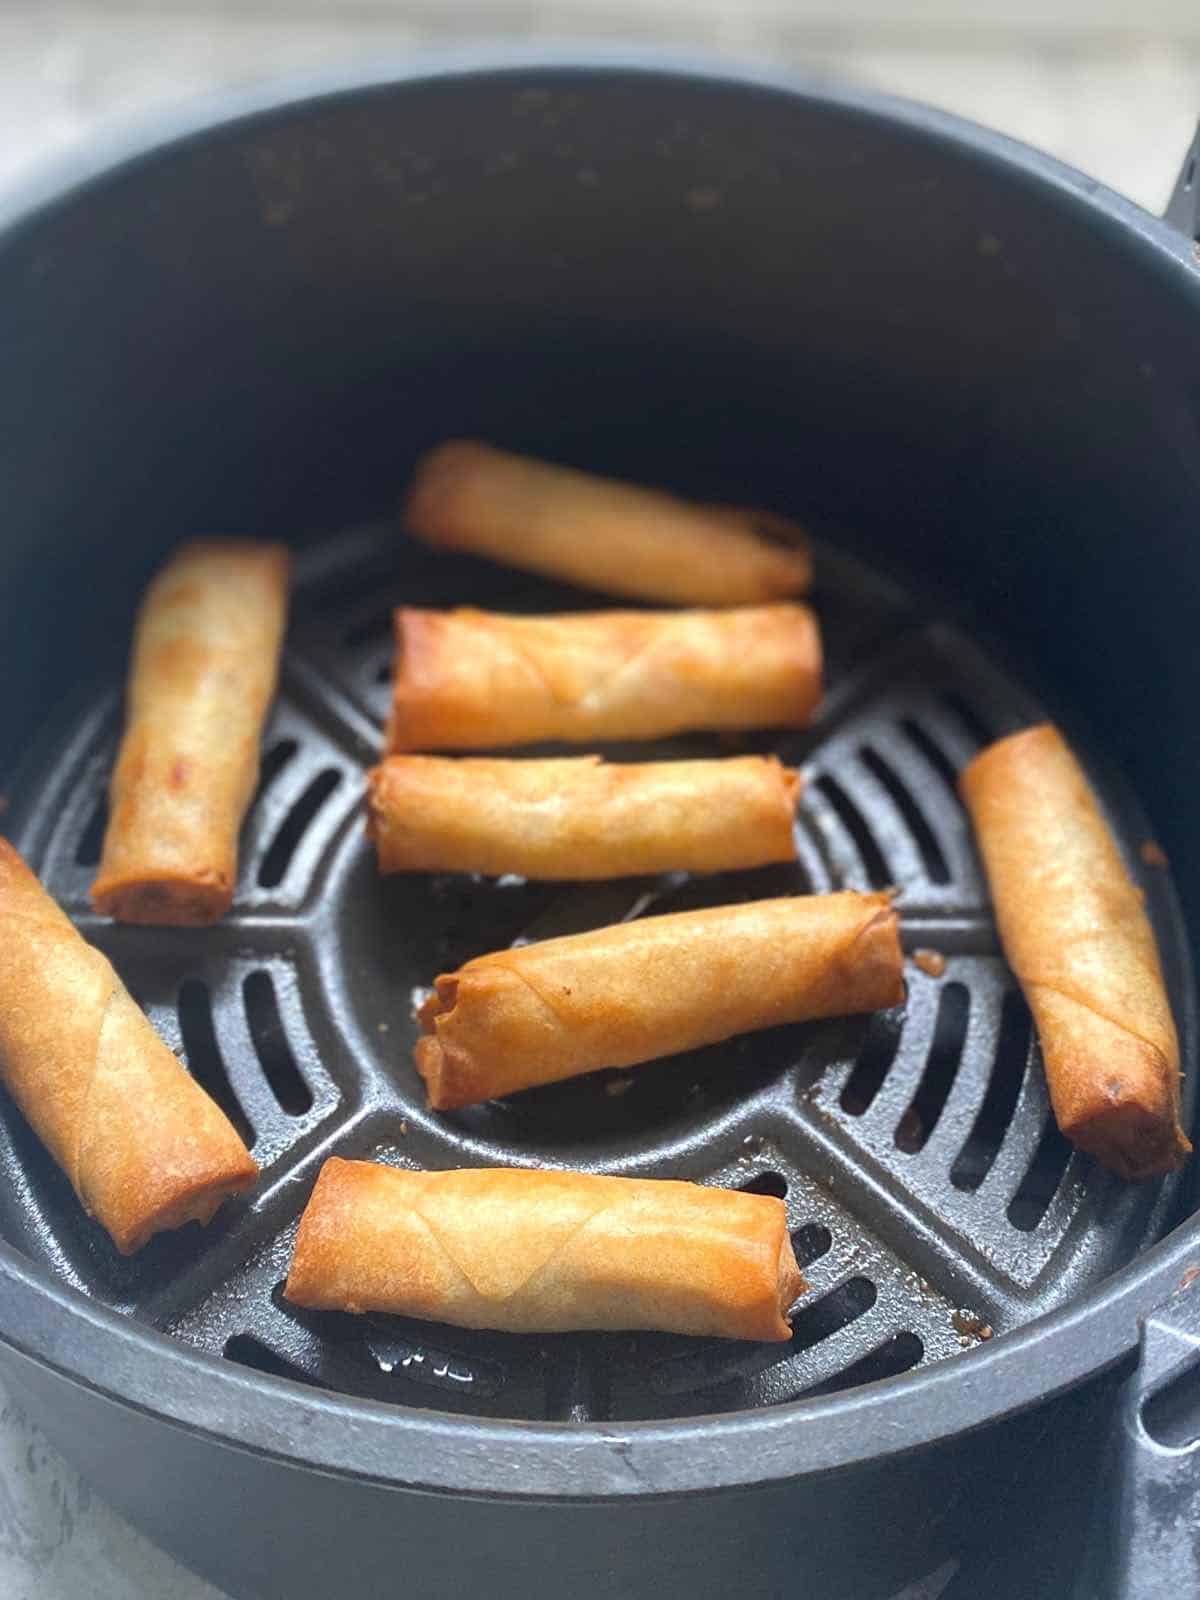 air fry frozen spring rolls In 390 F for 8 minutes until golden browned